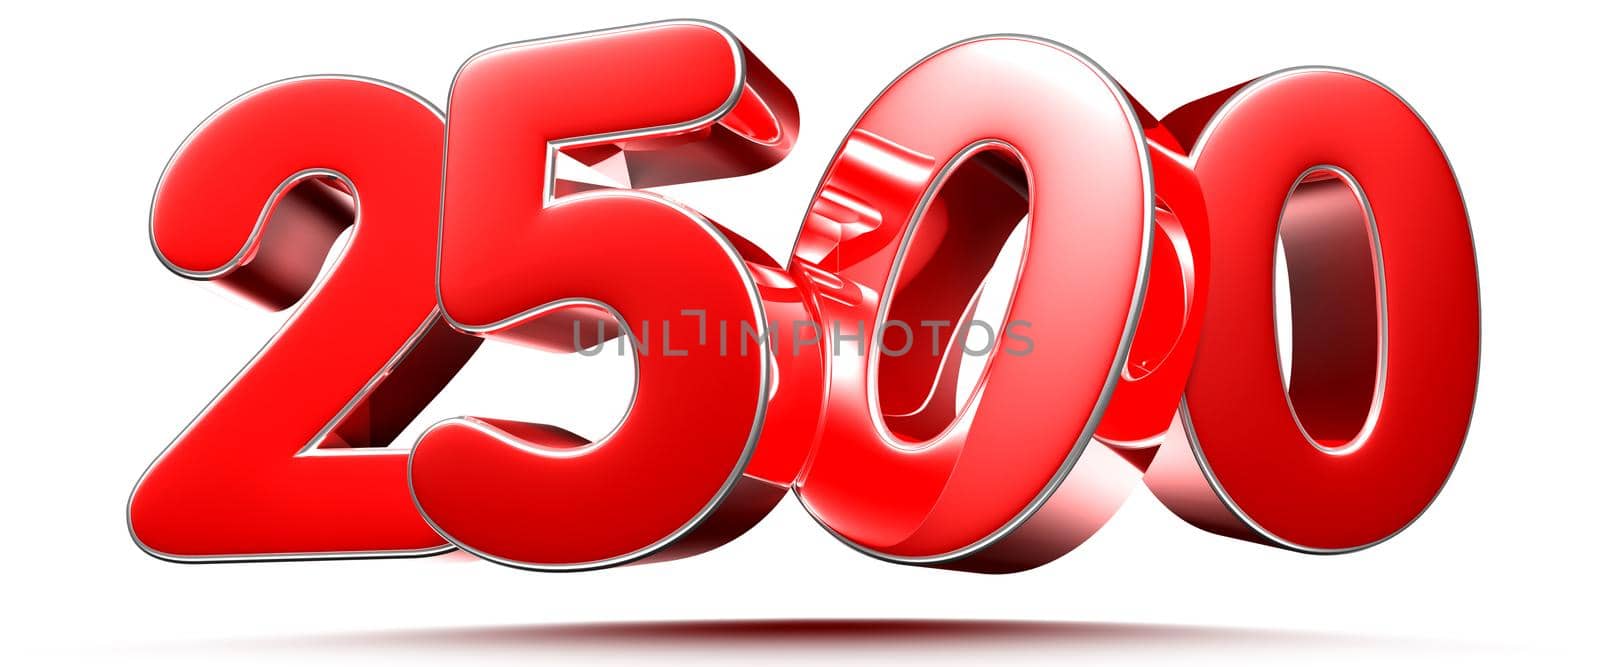 Rounded red numbers 2500 on white background 3D illustration with clipping path by thitimontoyai